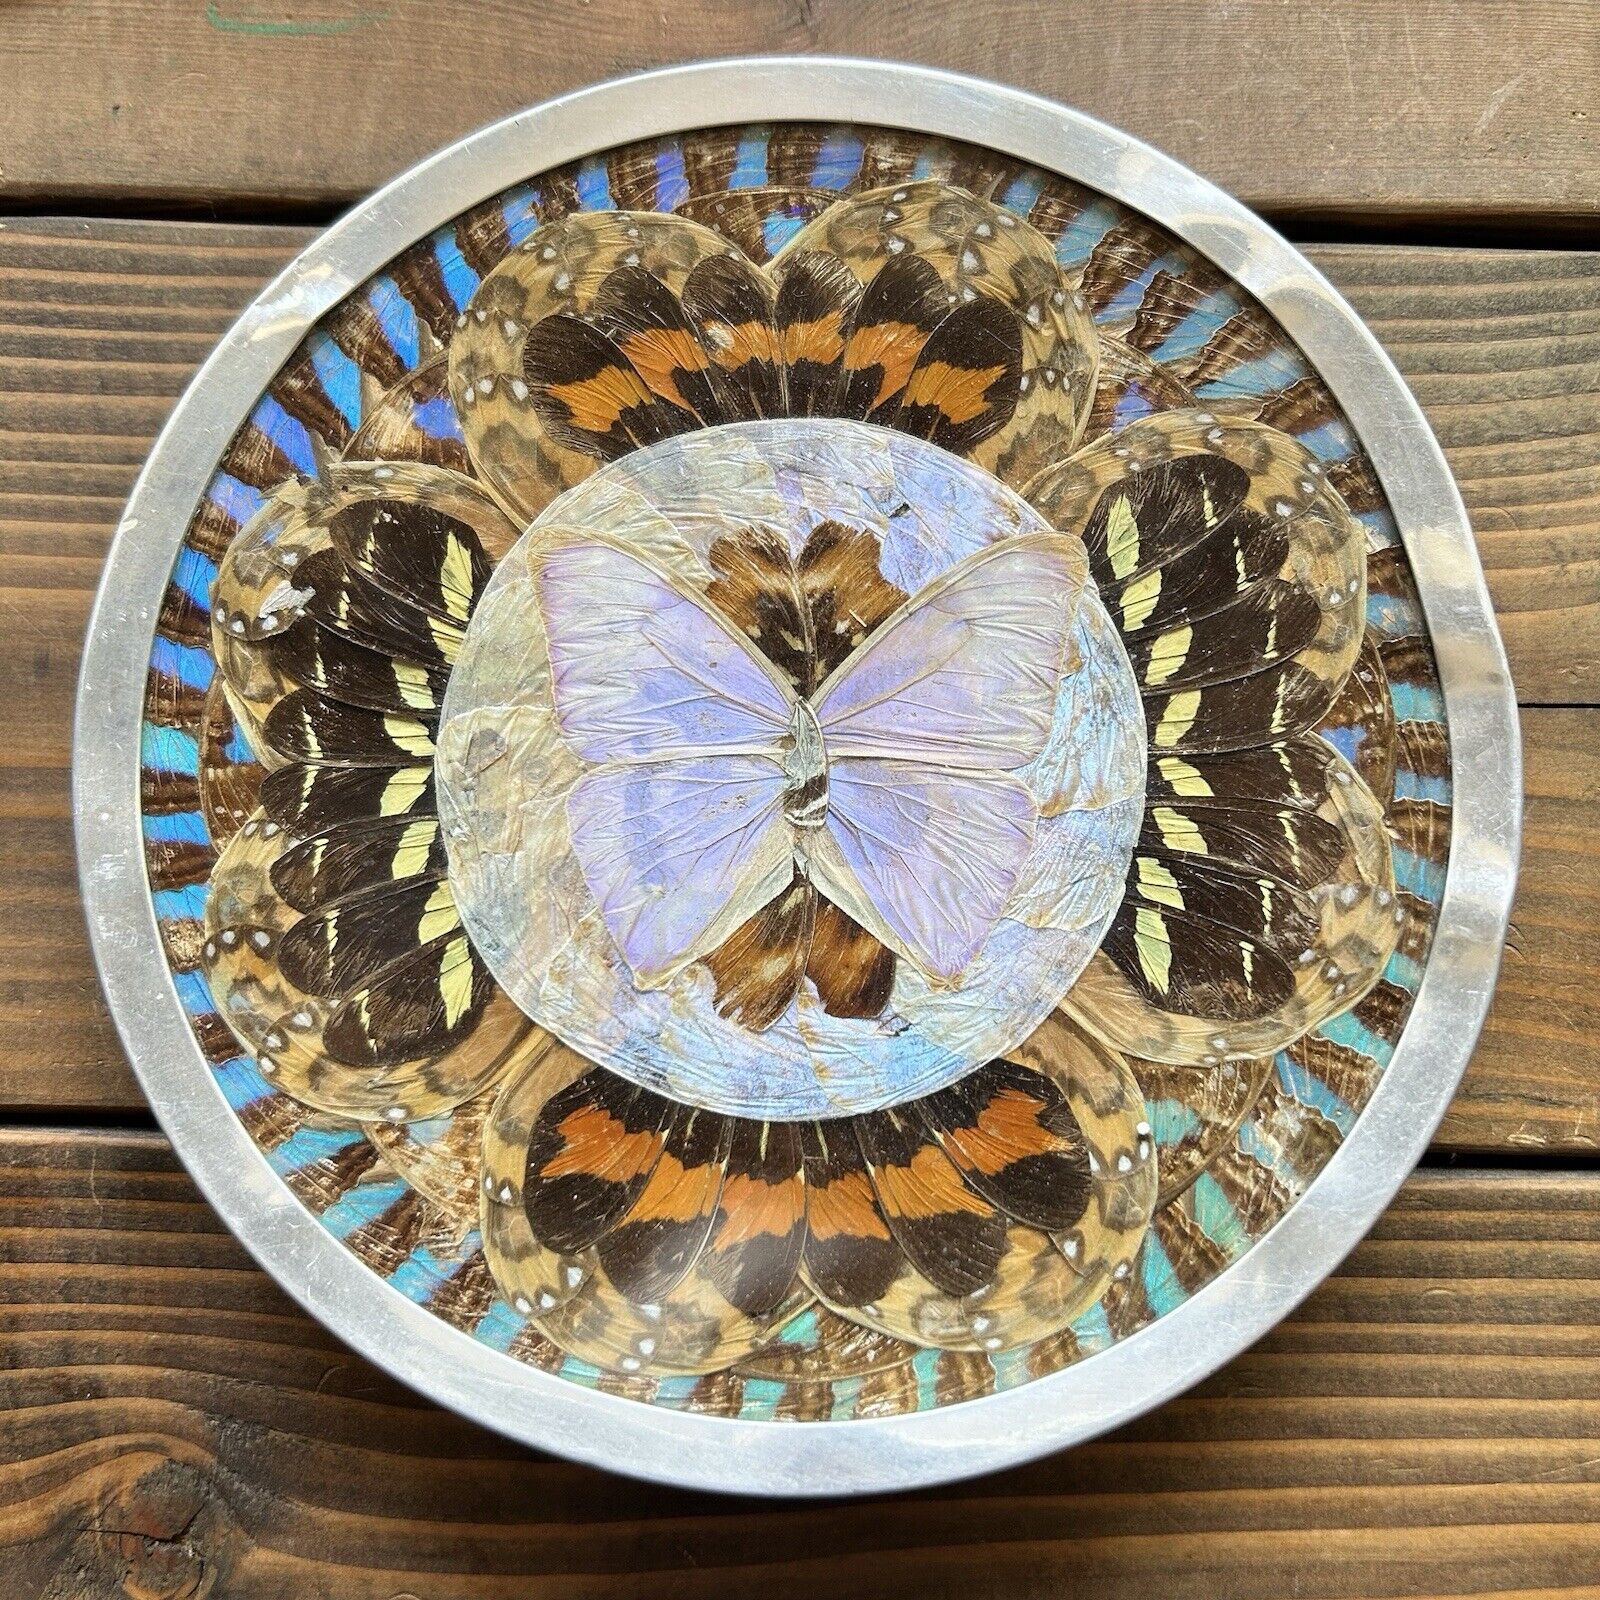 Vintage Art Deco Morpho Butterfly Wing Plate Art Wall Hanging Decor